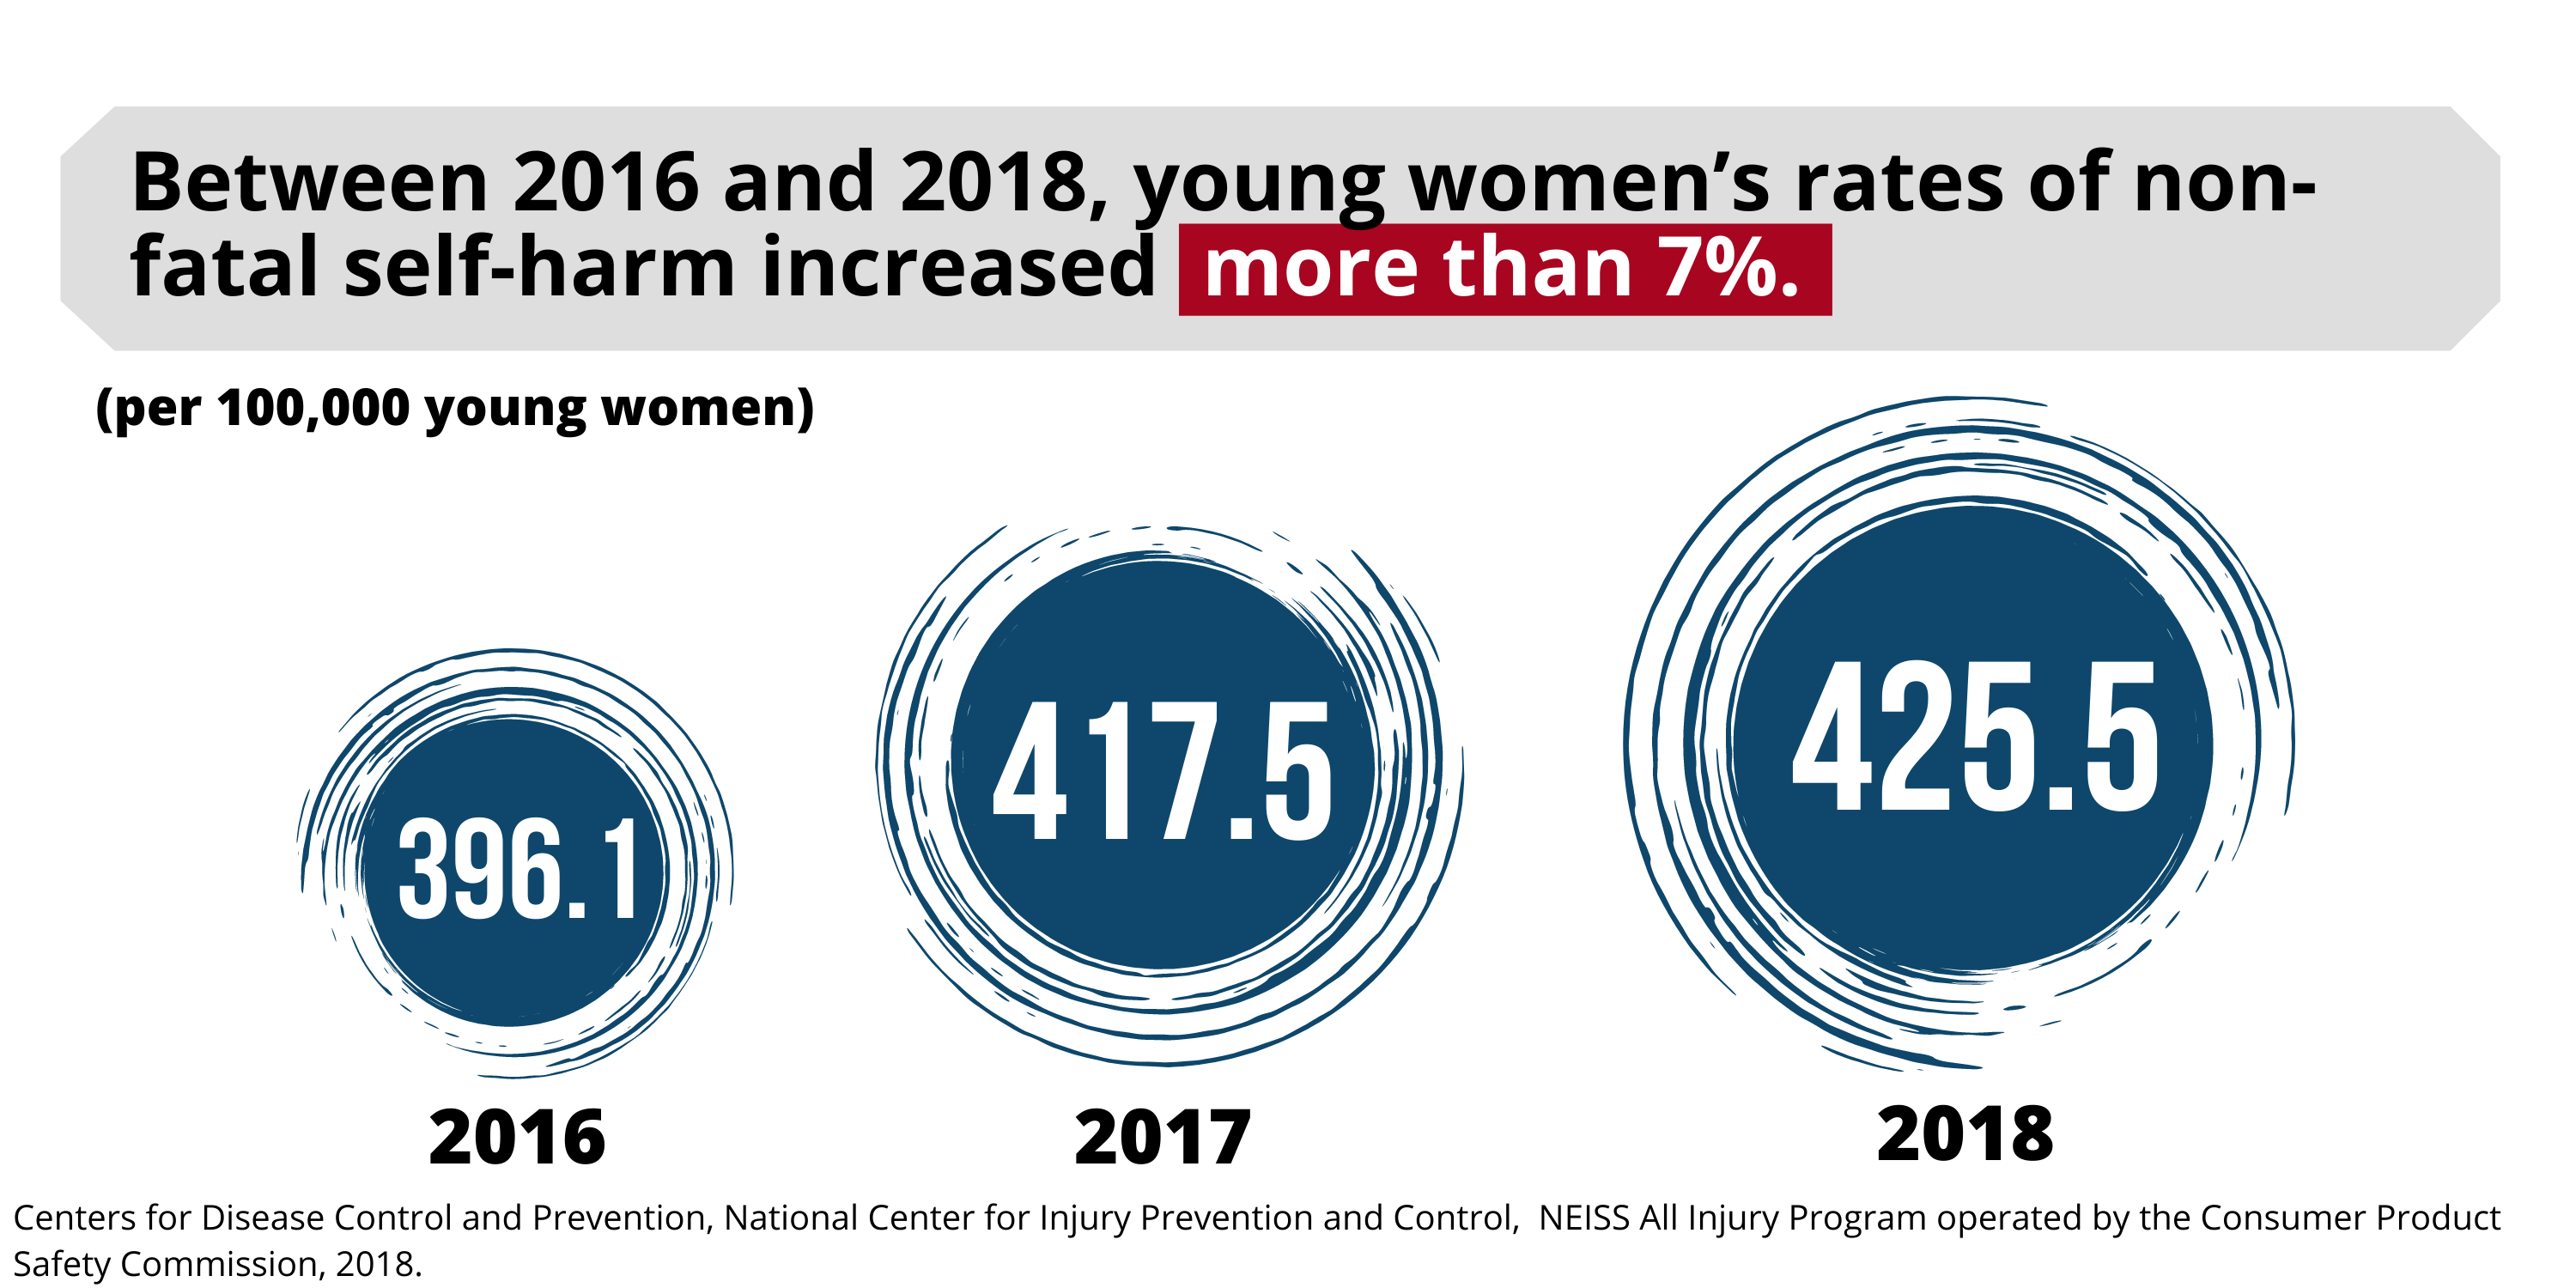 Between 2016 and 2018, young women’s rates of non-fatal self-harm increased more than 7%.